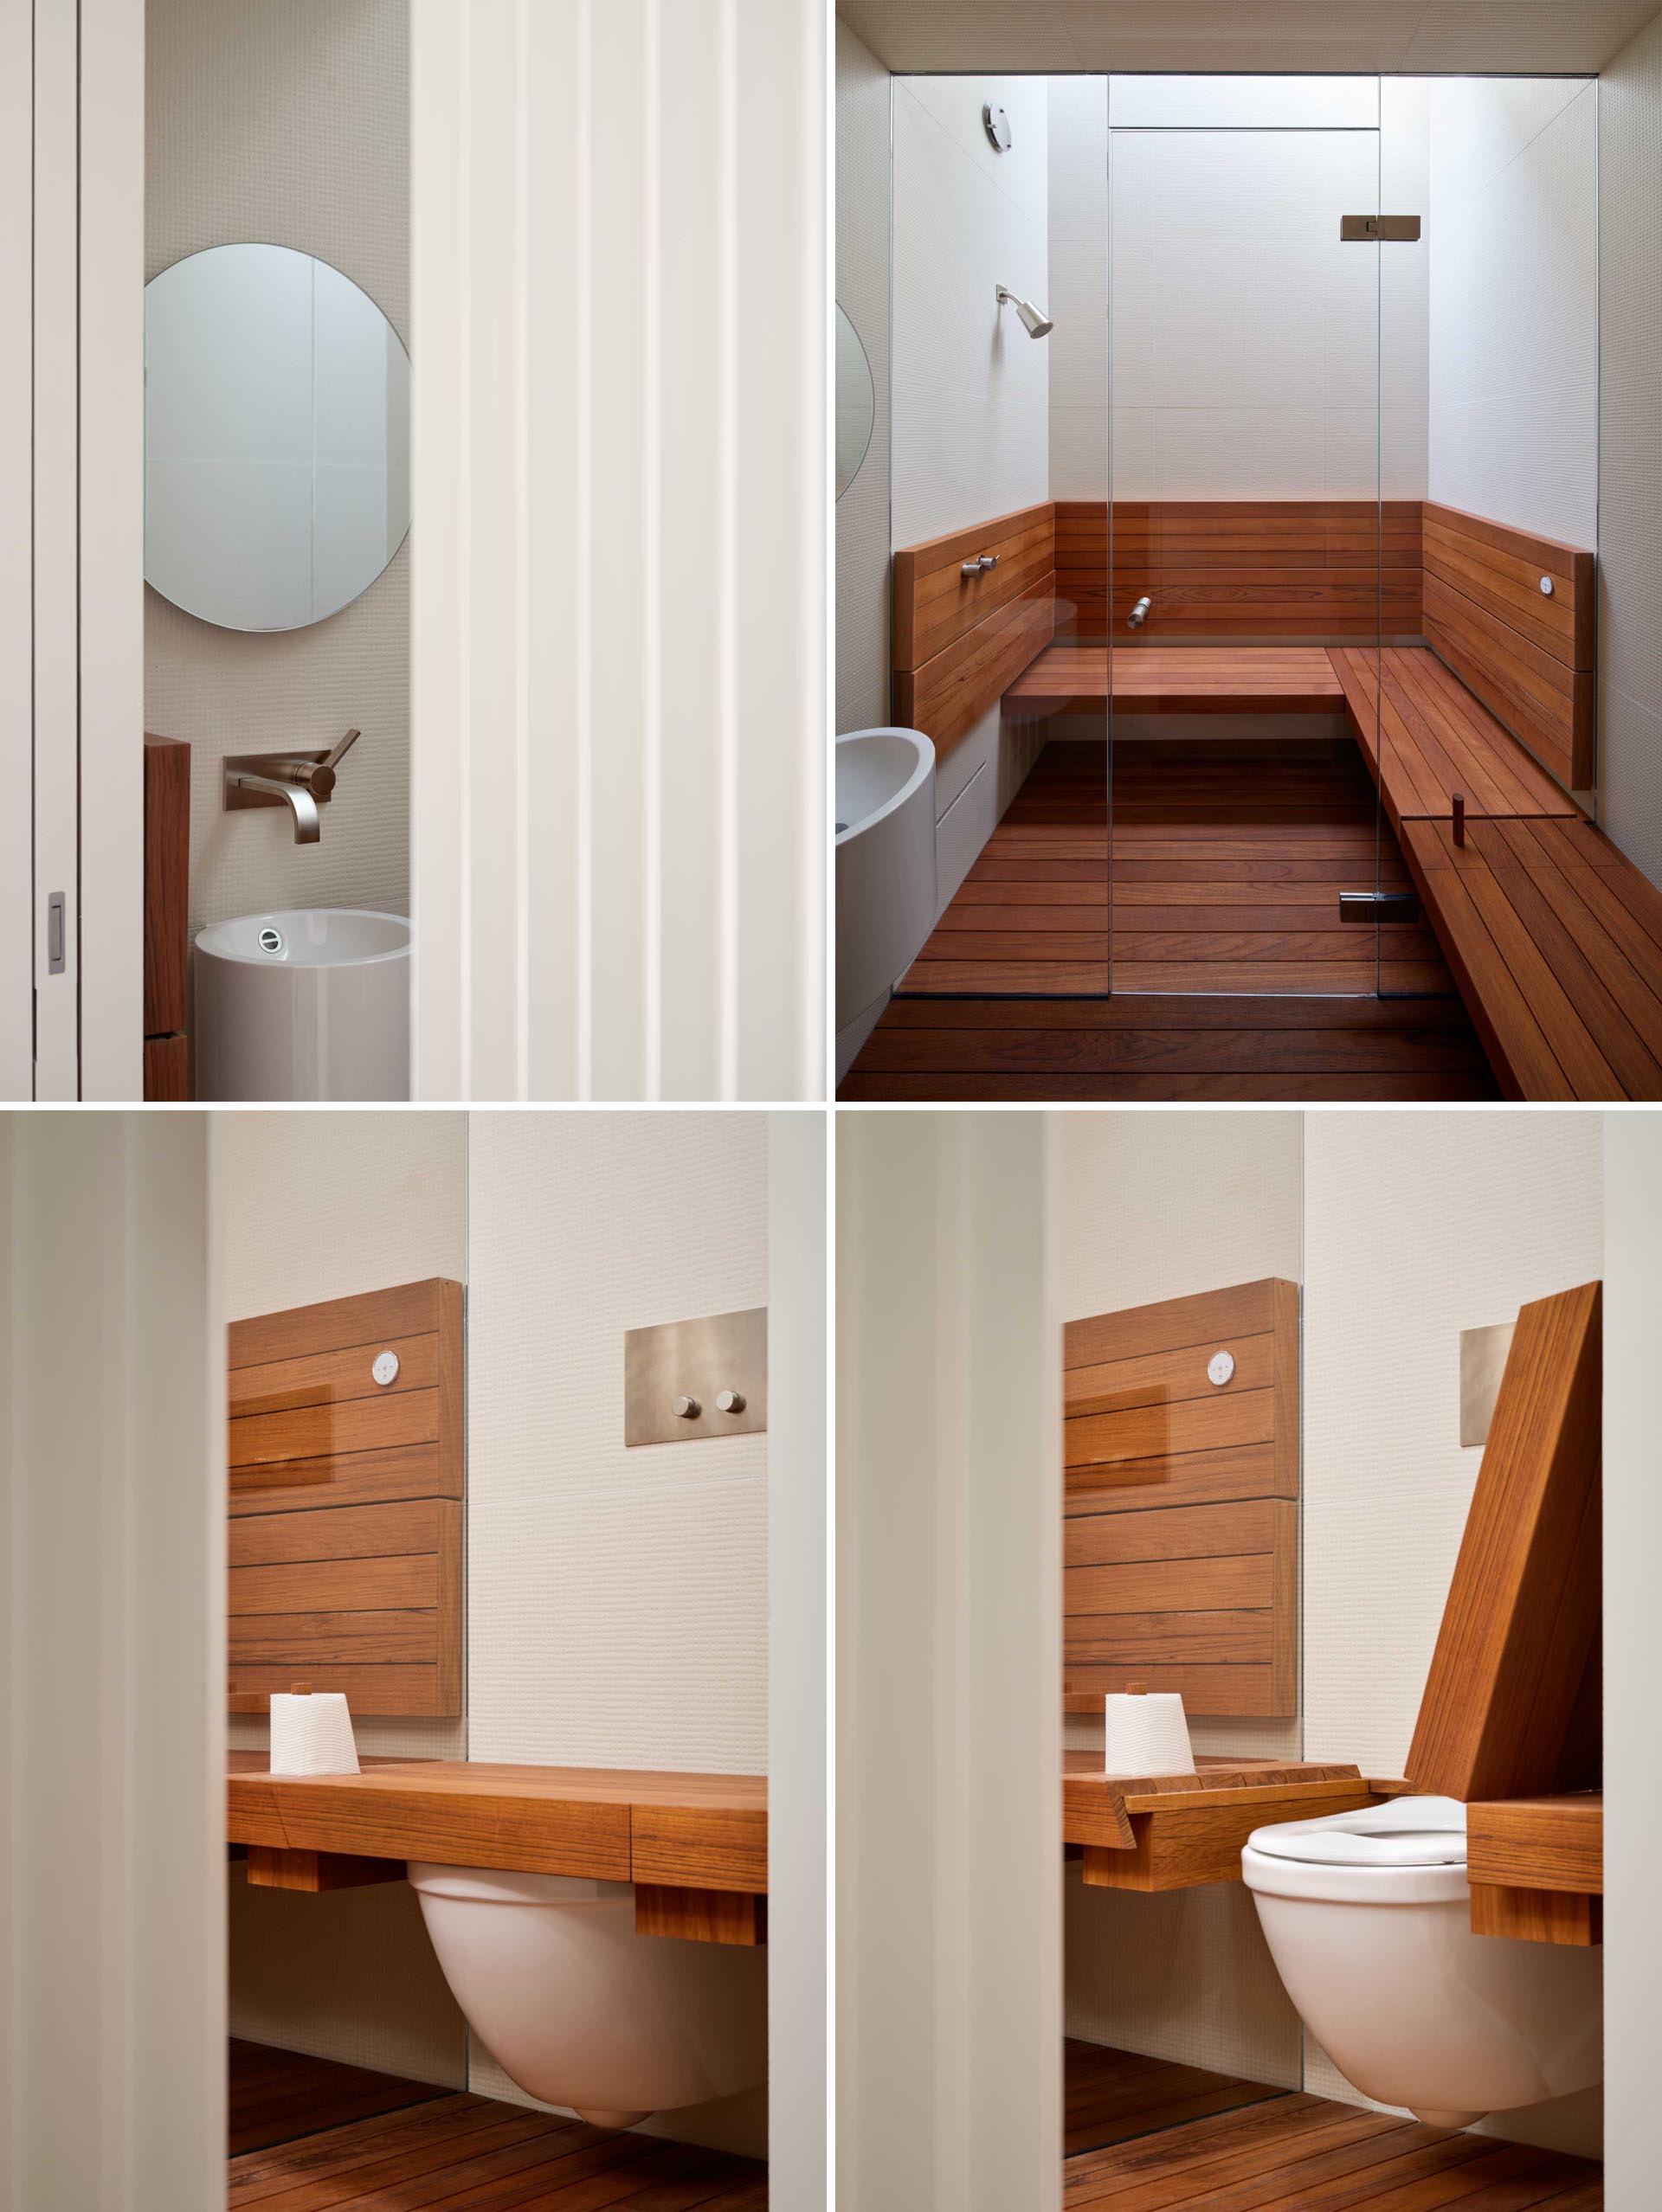 A modern steam room that's been designed with a custom teak bench and integrated toilet seat.